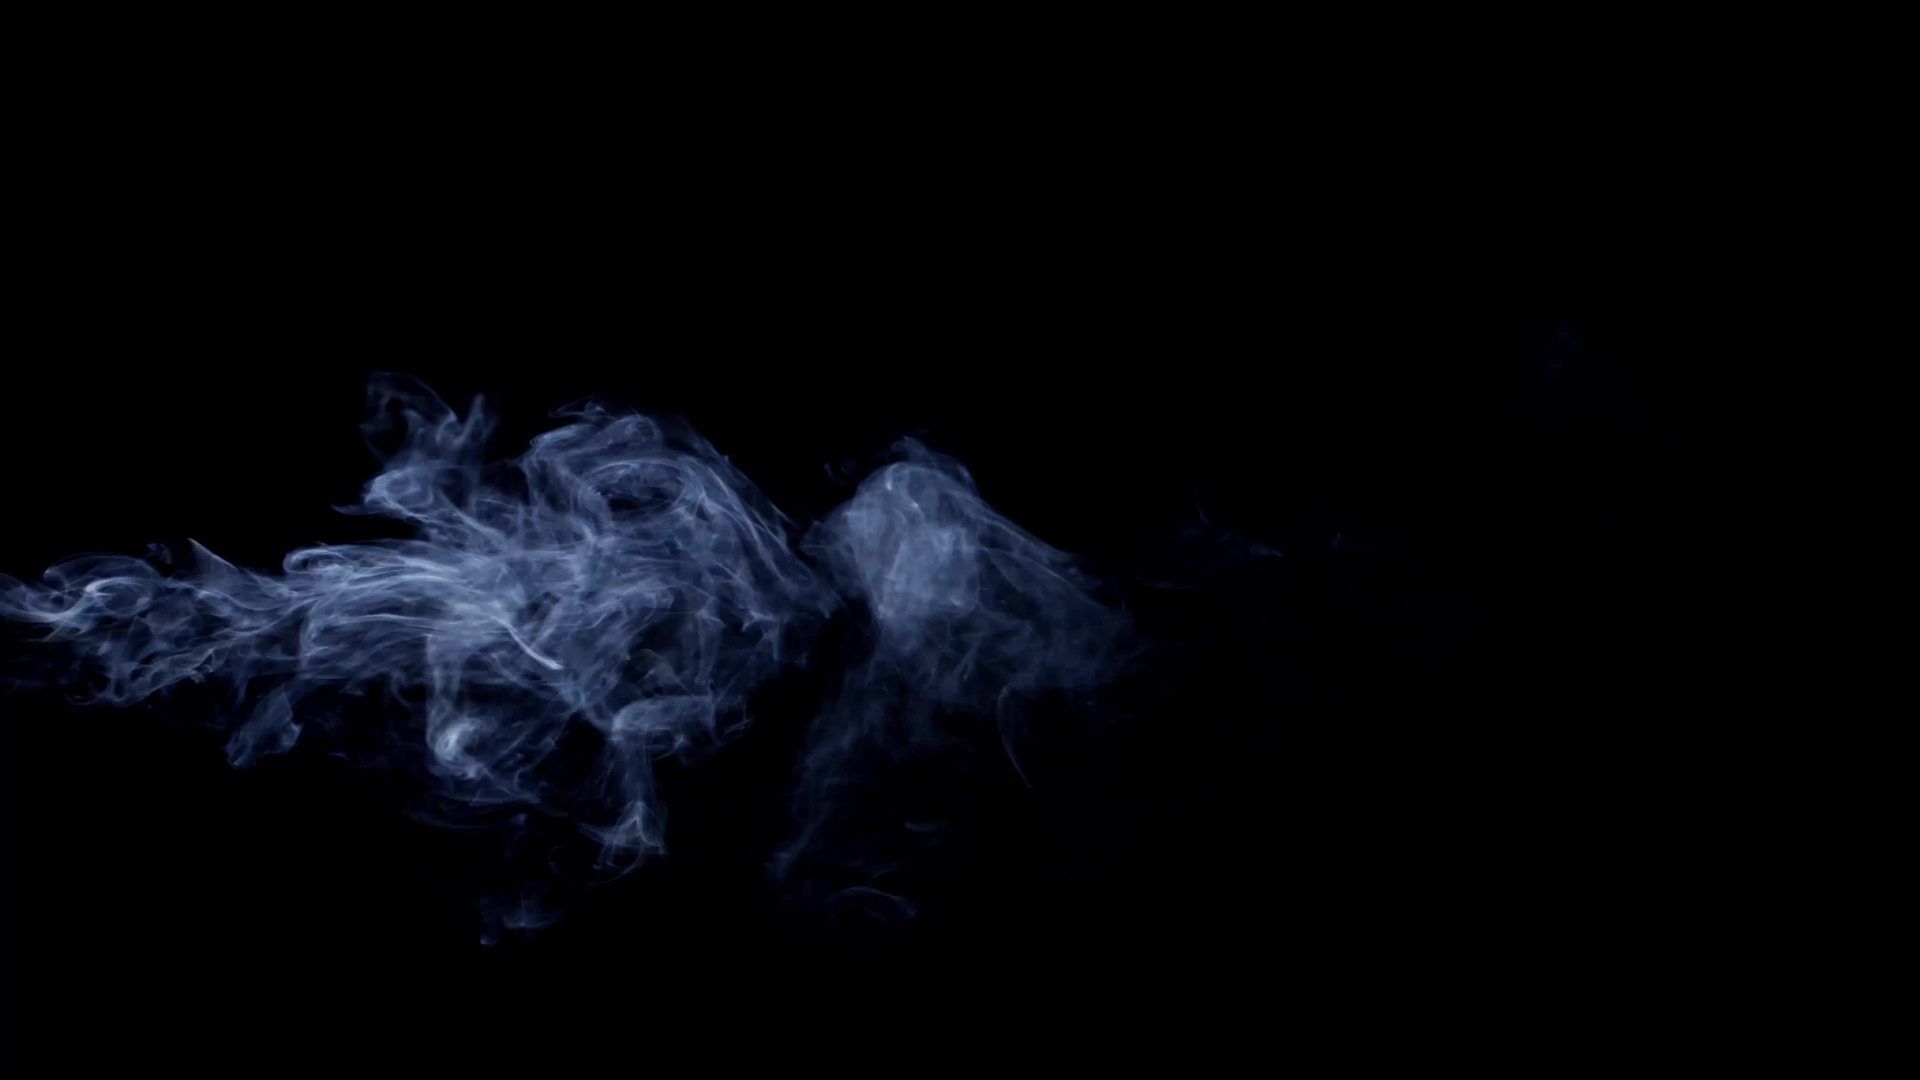 Awesome Smoke Effect Moving Slow And Drawing Spirals On Dark